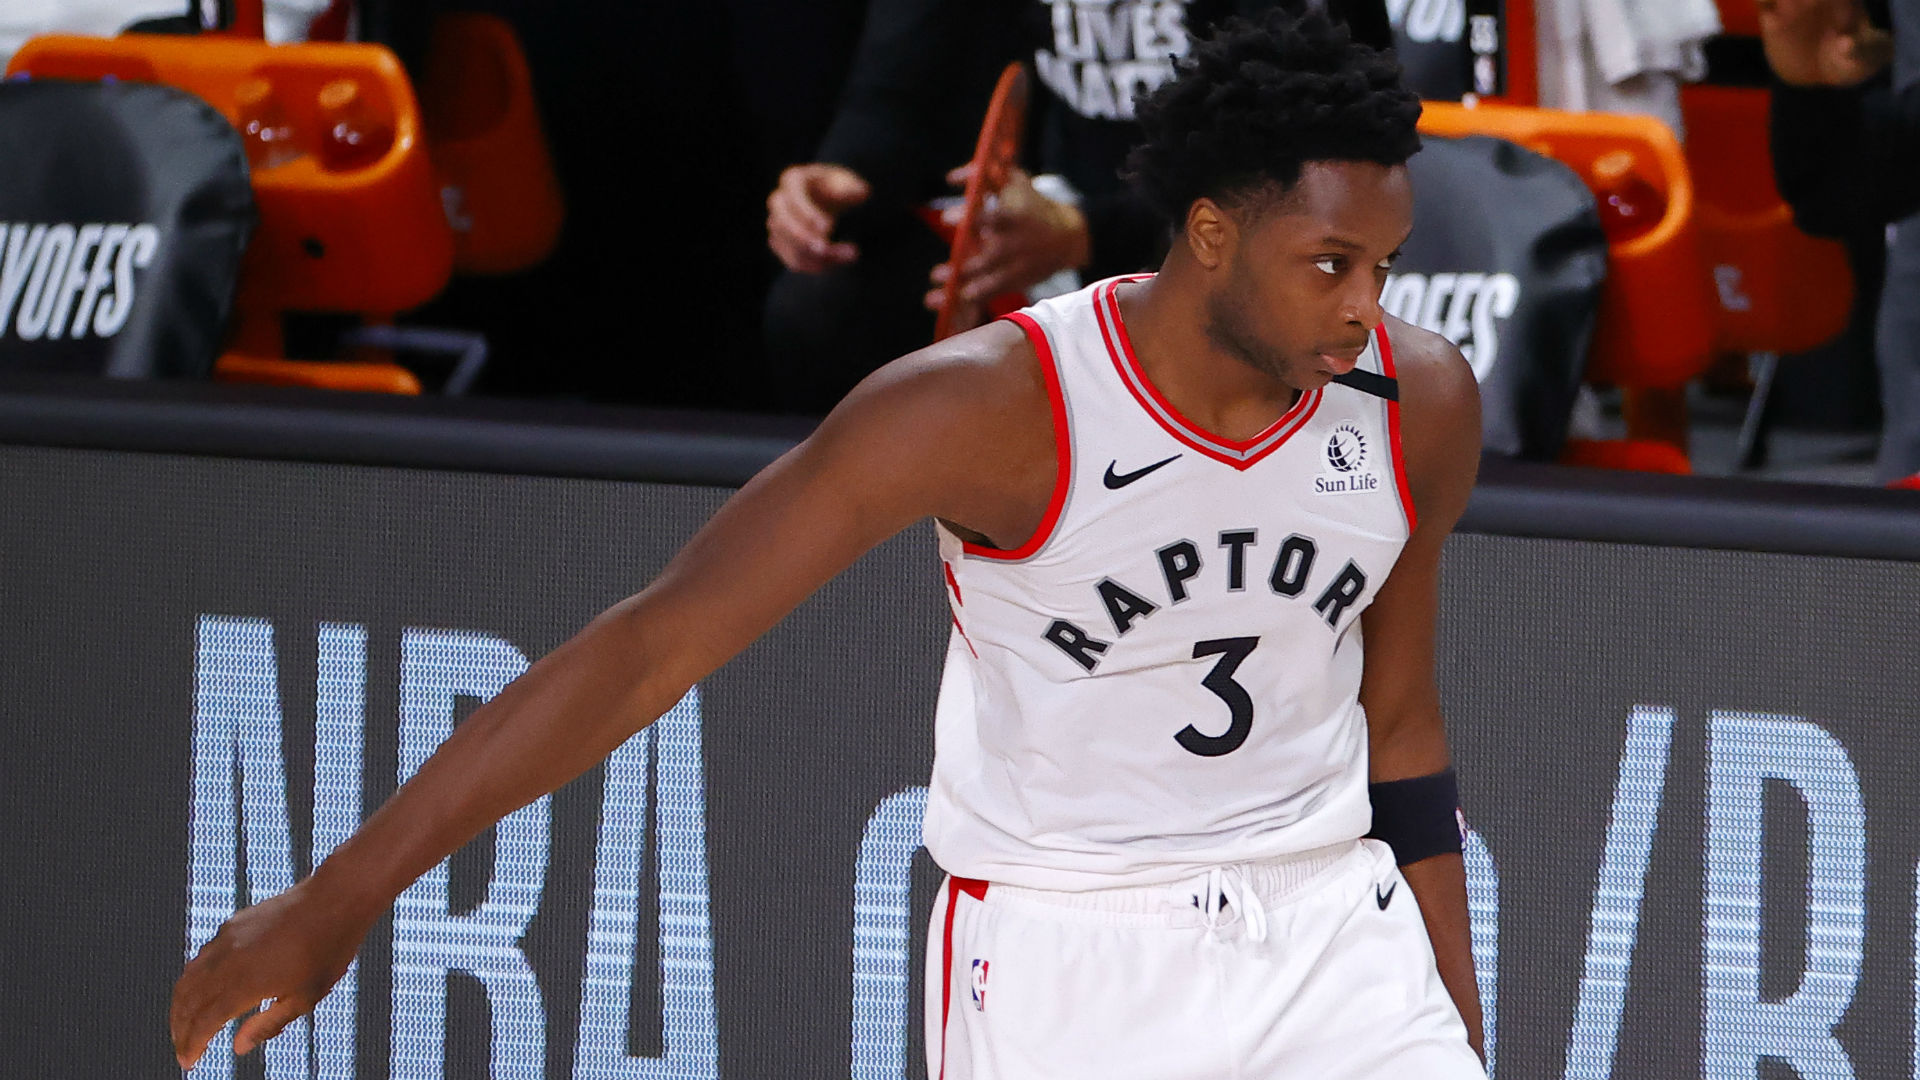 One Play Toronto Raptors forward OG Anunoby is a defensive mastermind